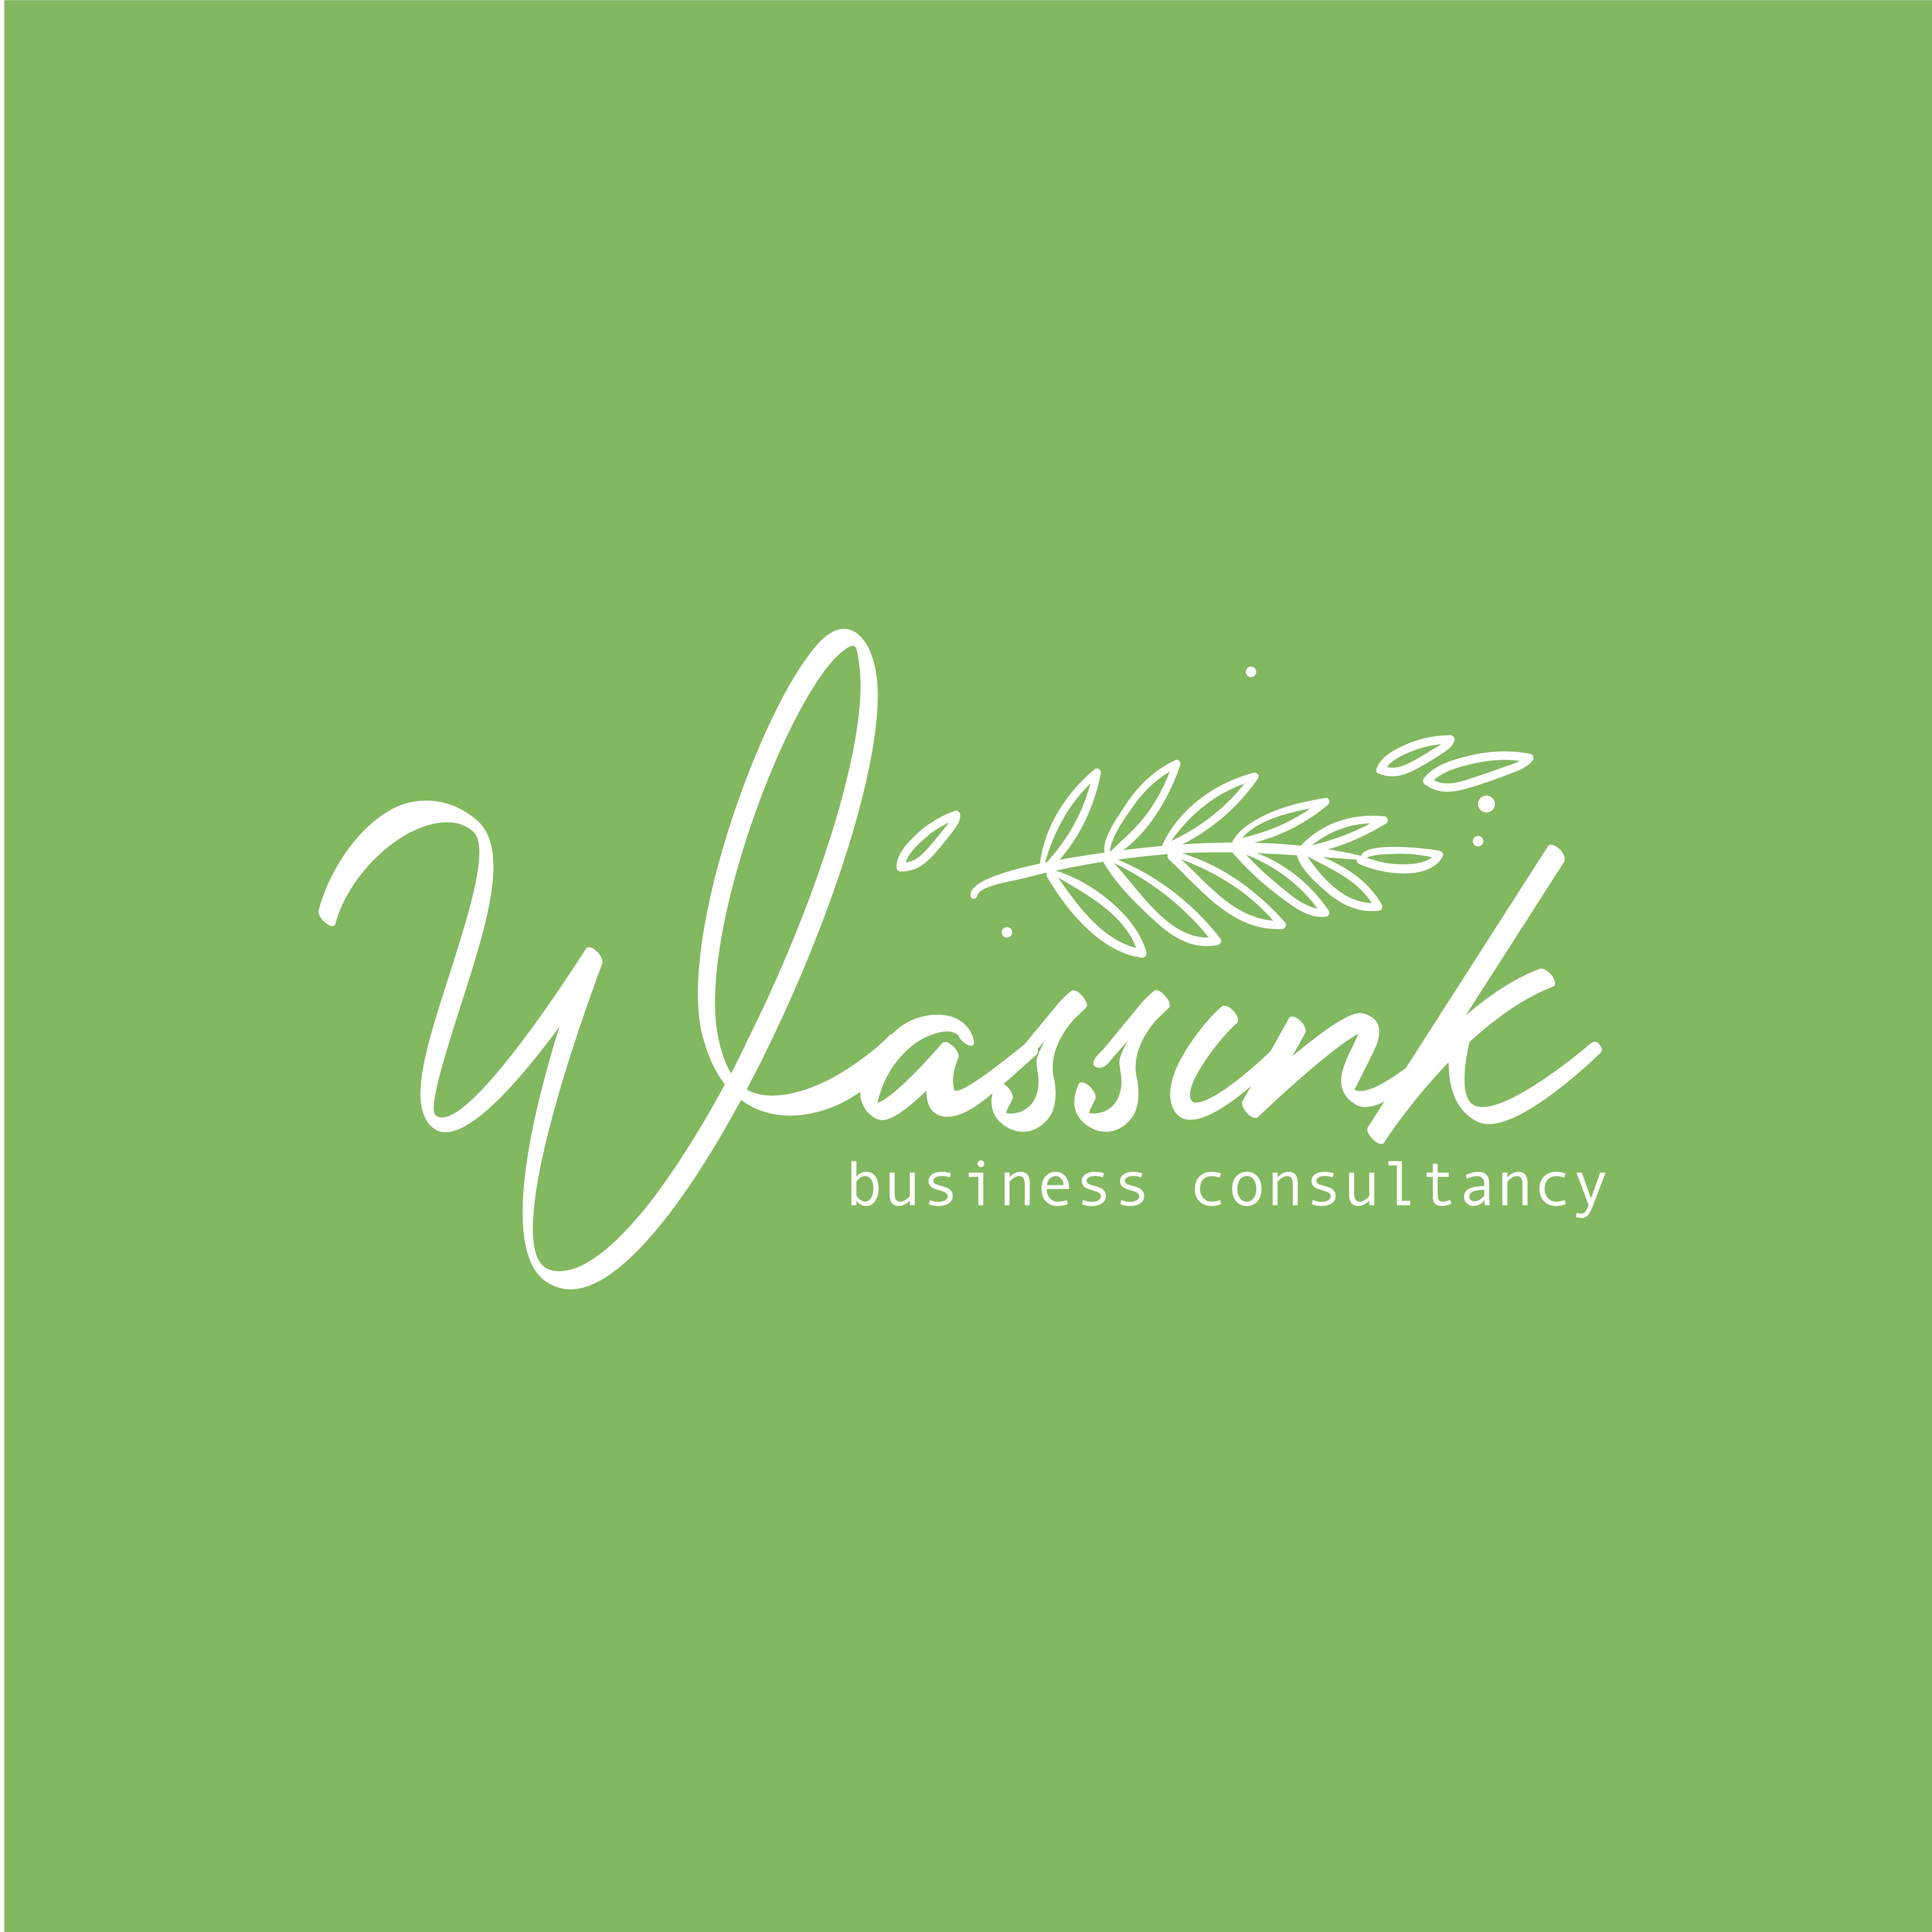 Wassink Business Consultancy